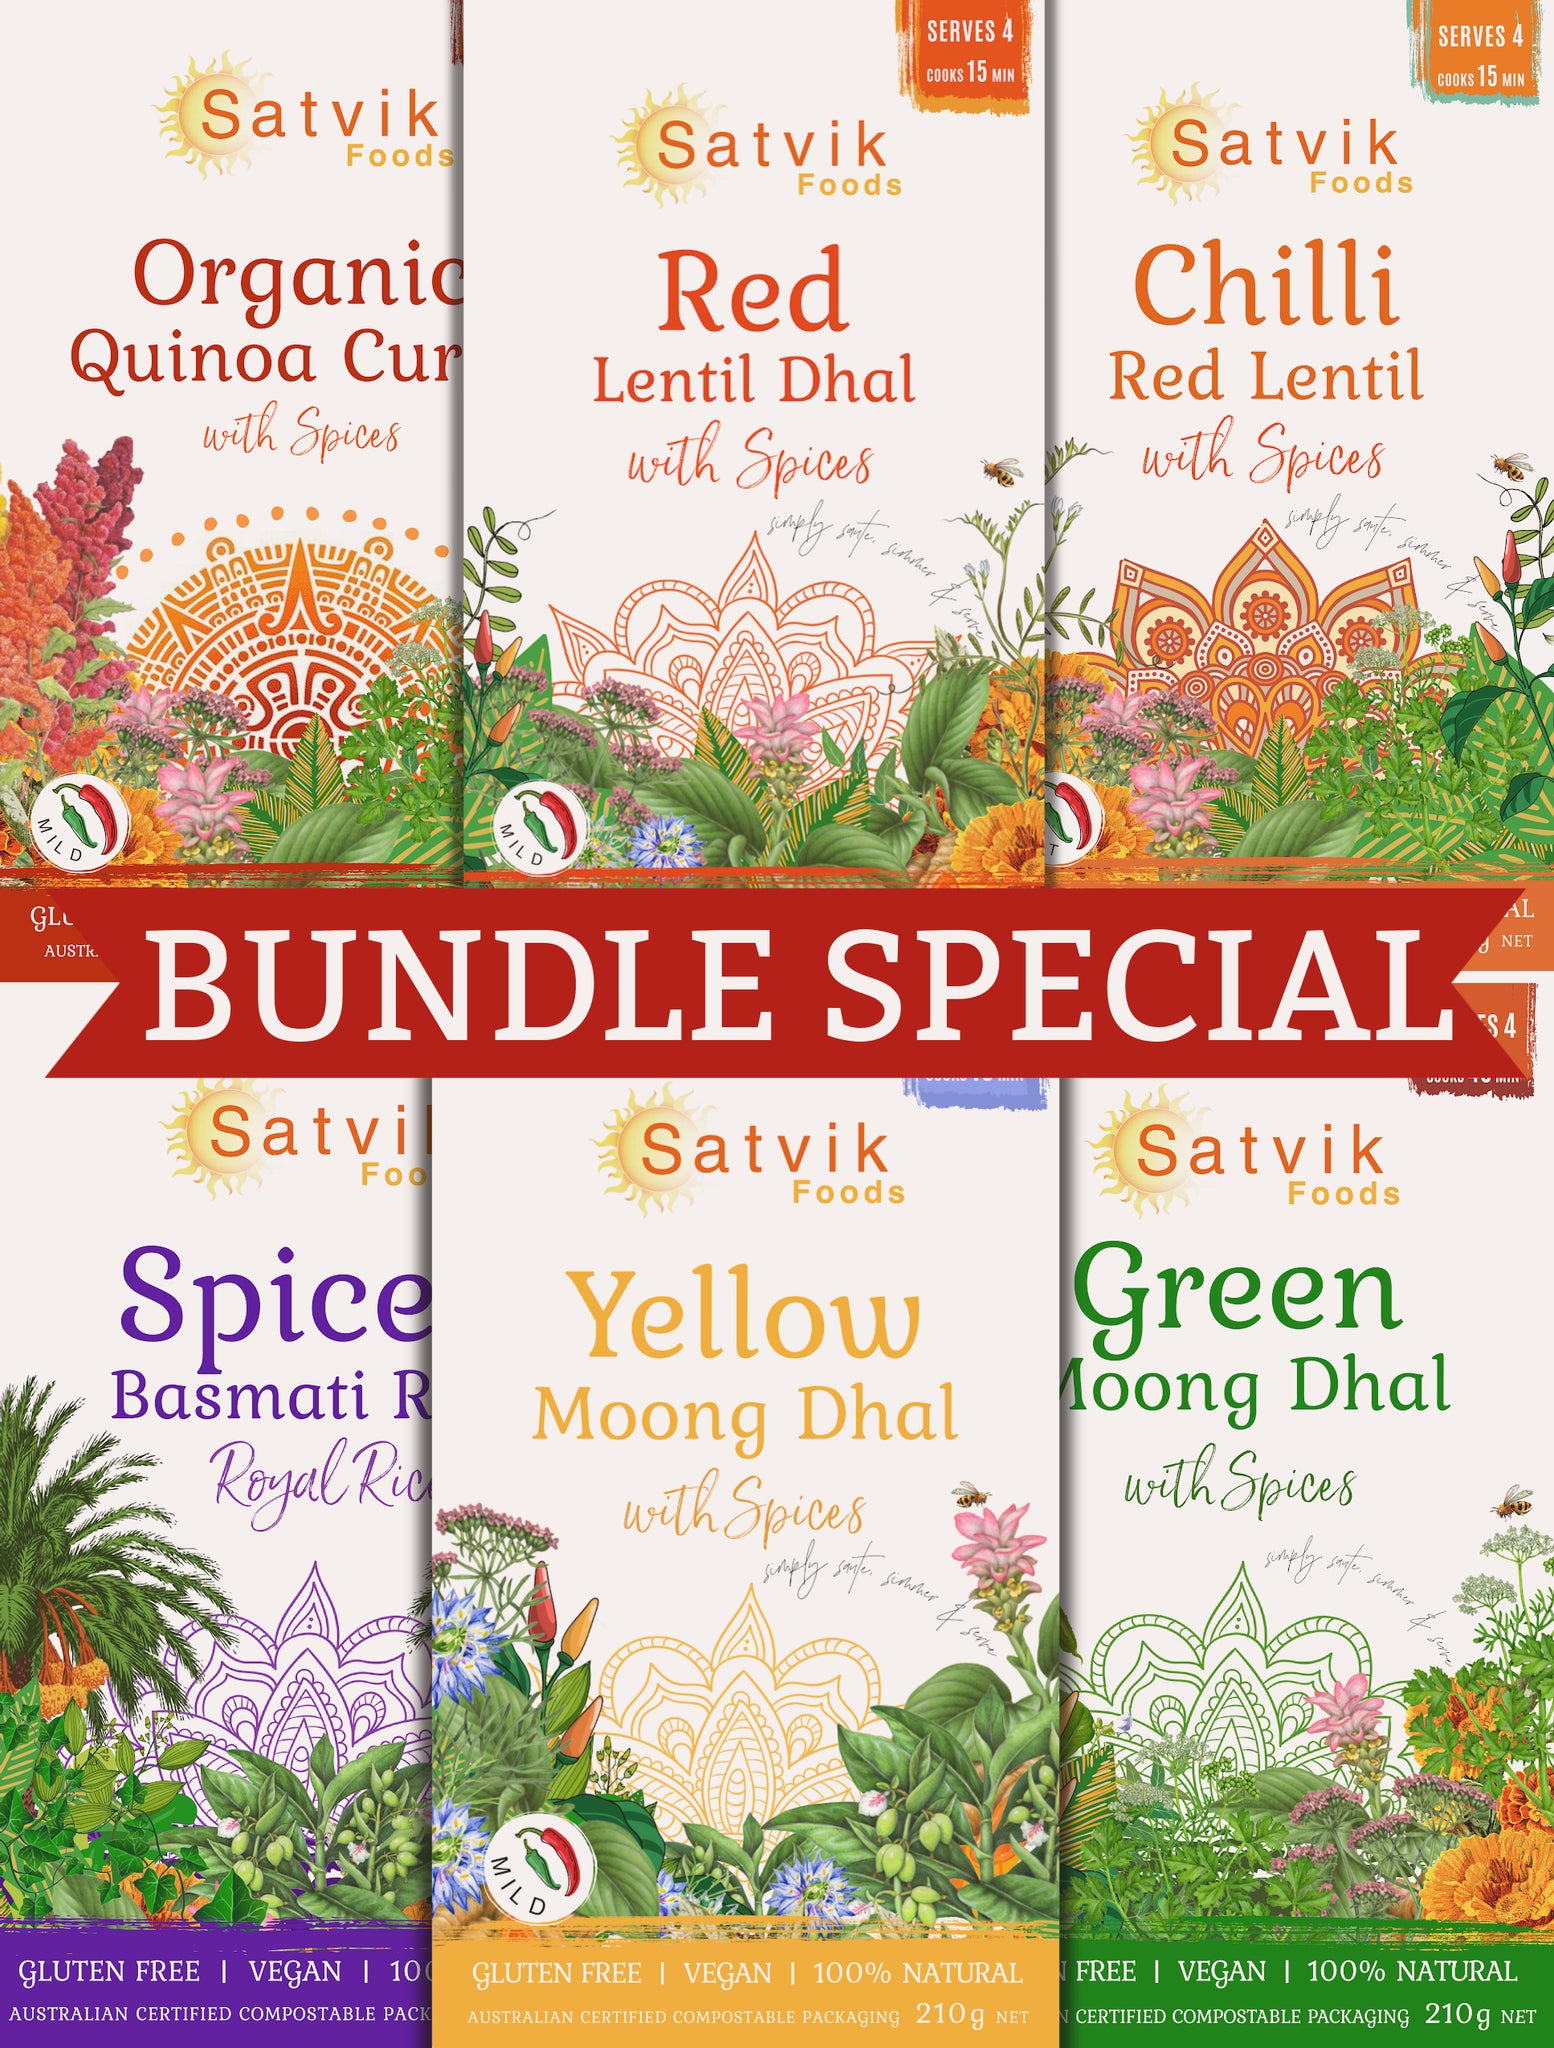 The Satvik foods bundle special features Red lentil dhal, yellow moong dhal, green moong dhal, spiced basmati and organic quinoa at a discount price